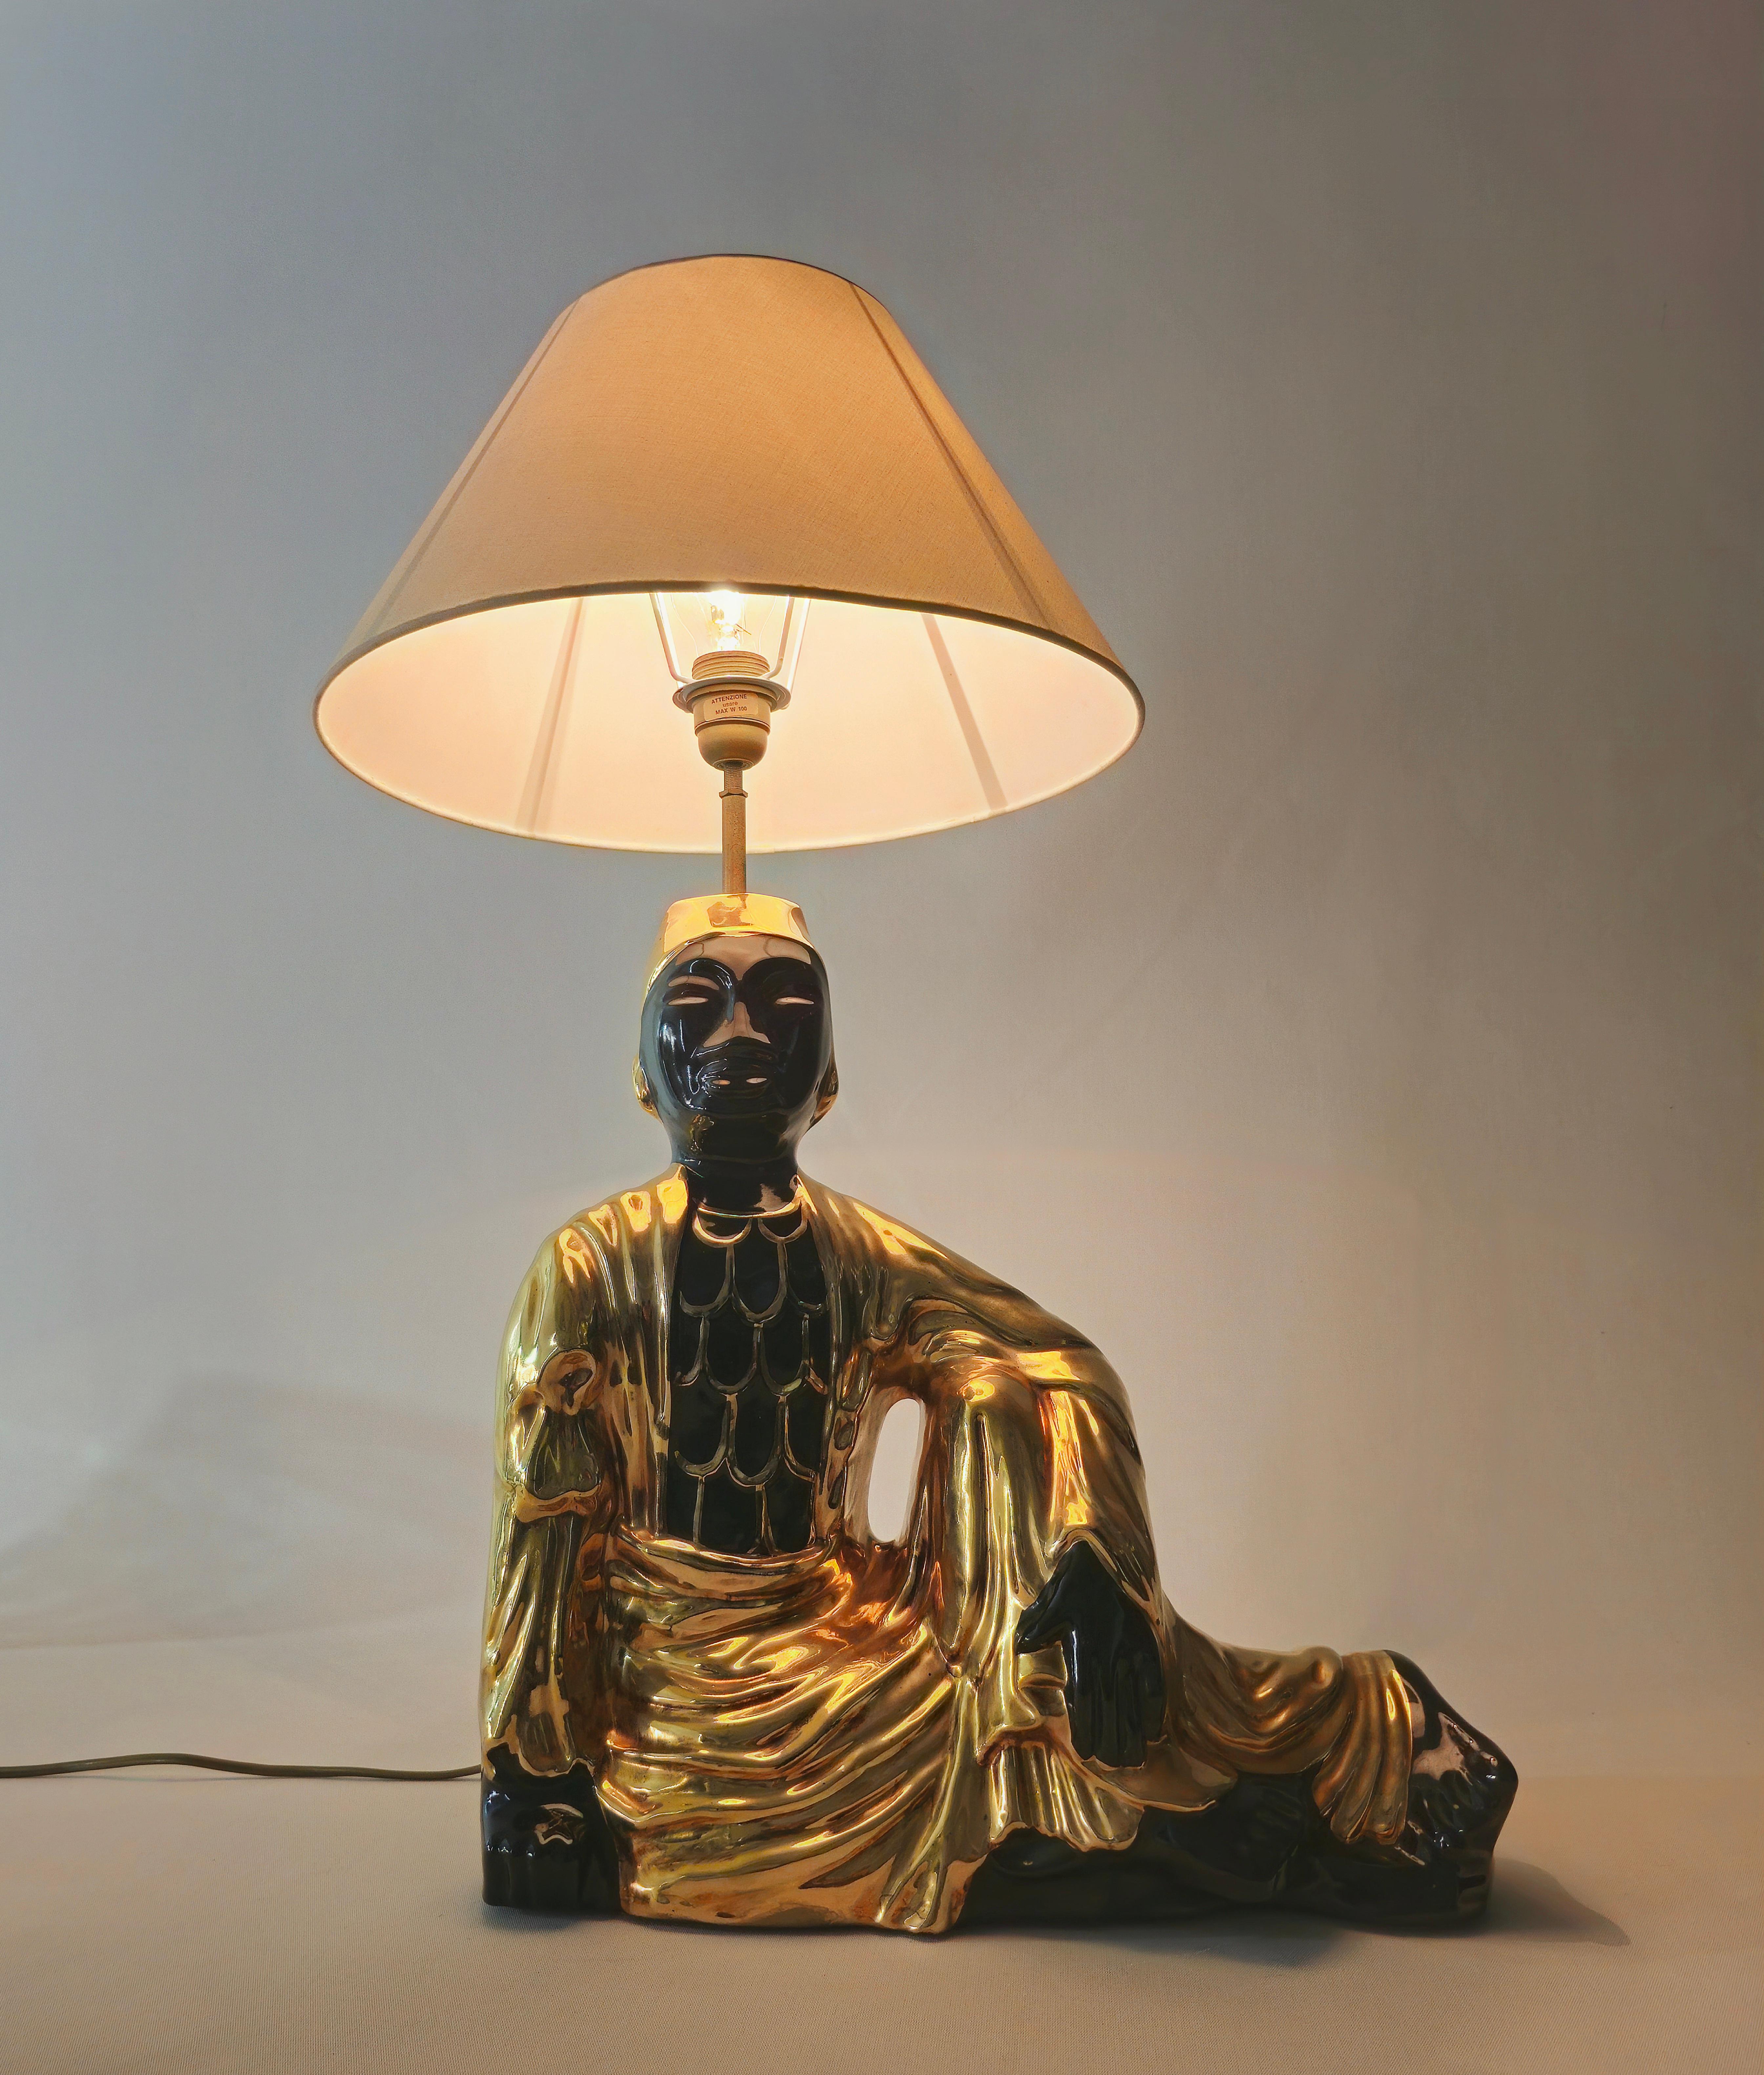 Ceramic Buddha Large Table Lamp Italy 1970s Midcentury For Sale 7